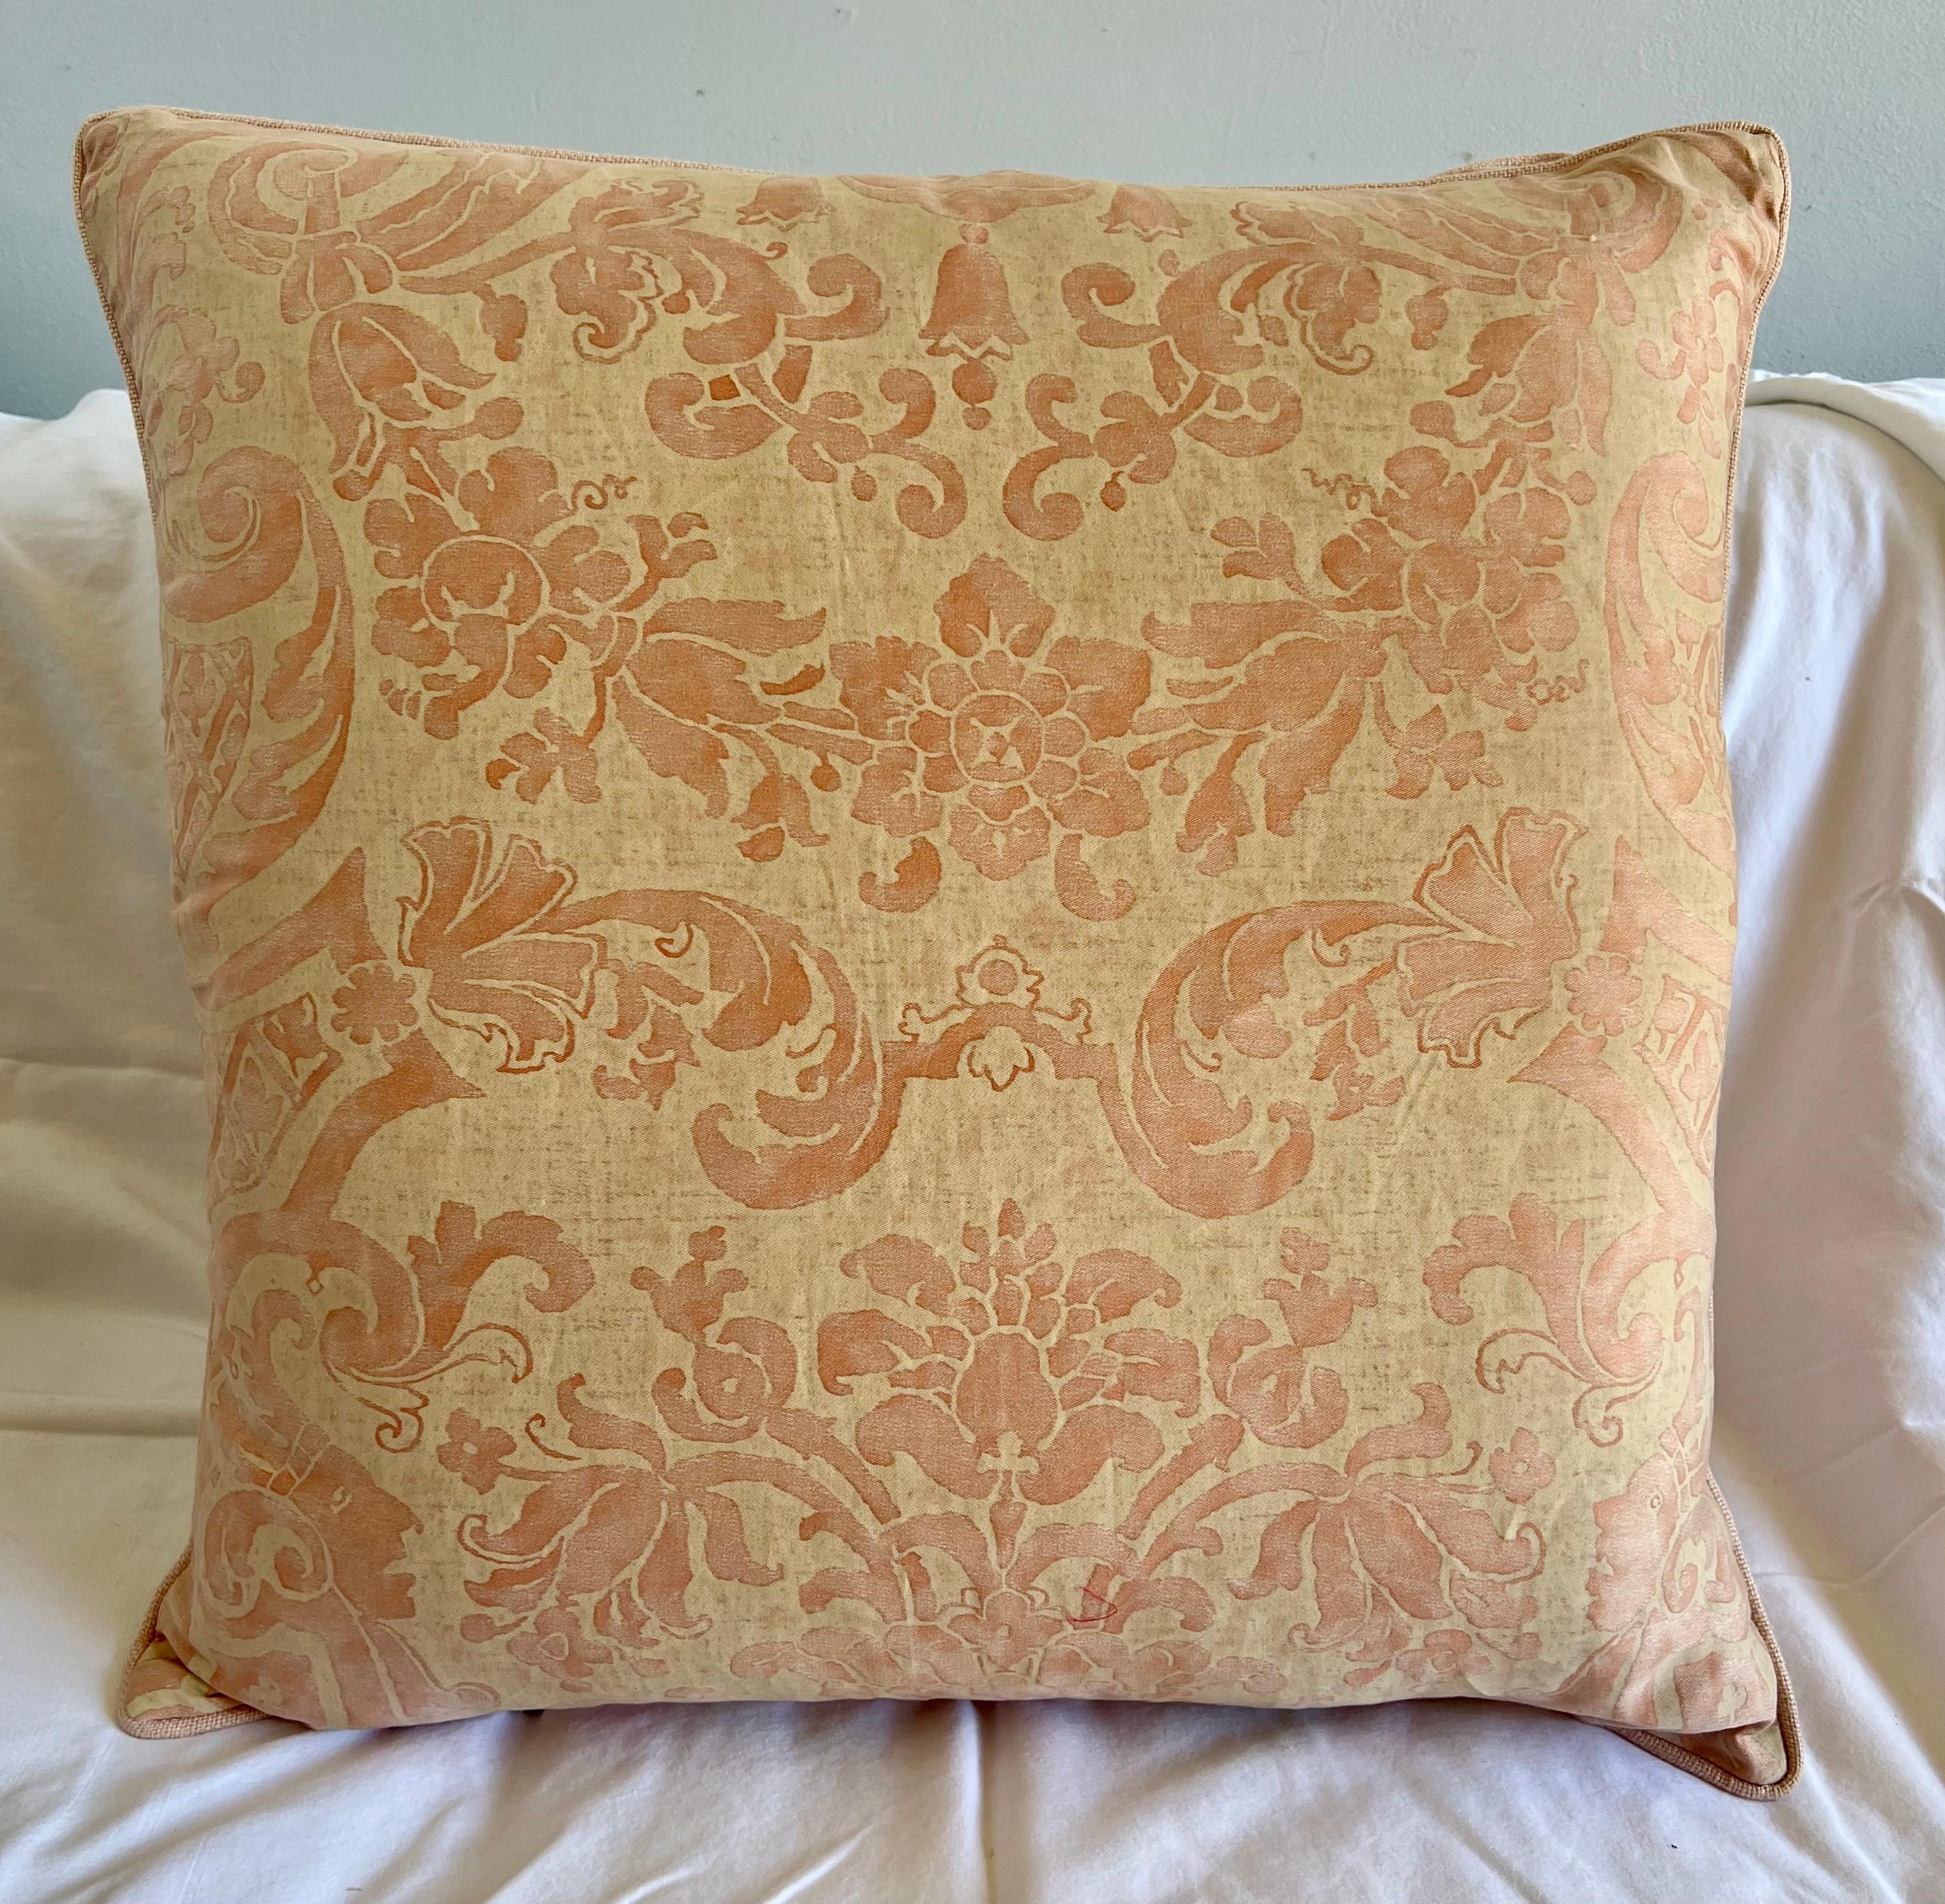 Pair of custom pillows made with vintage printed Fortuny textile fronts and cream velvet backs with self cording. Down inserts, sewn closed.